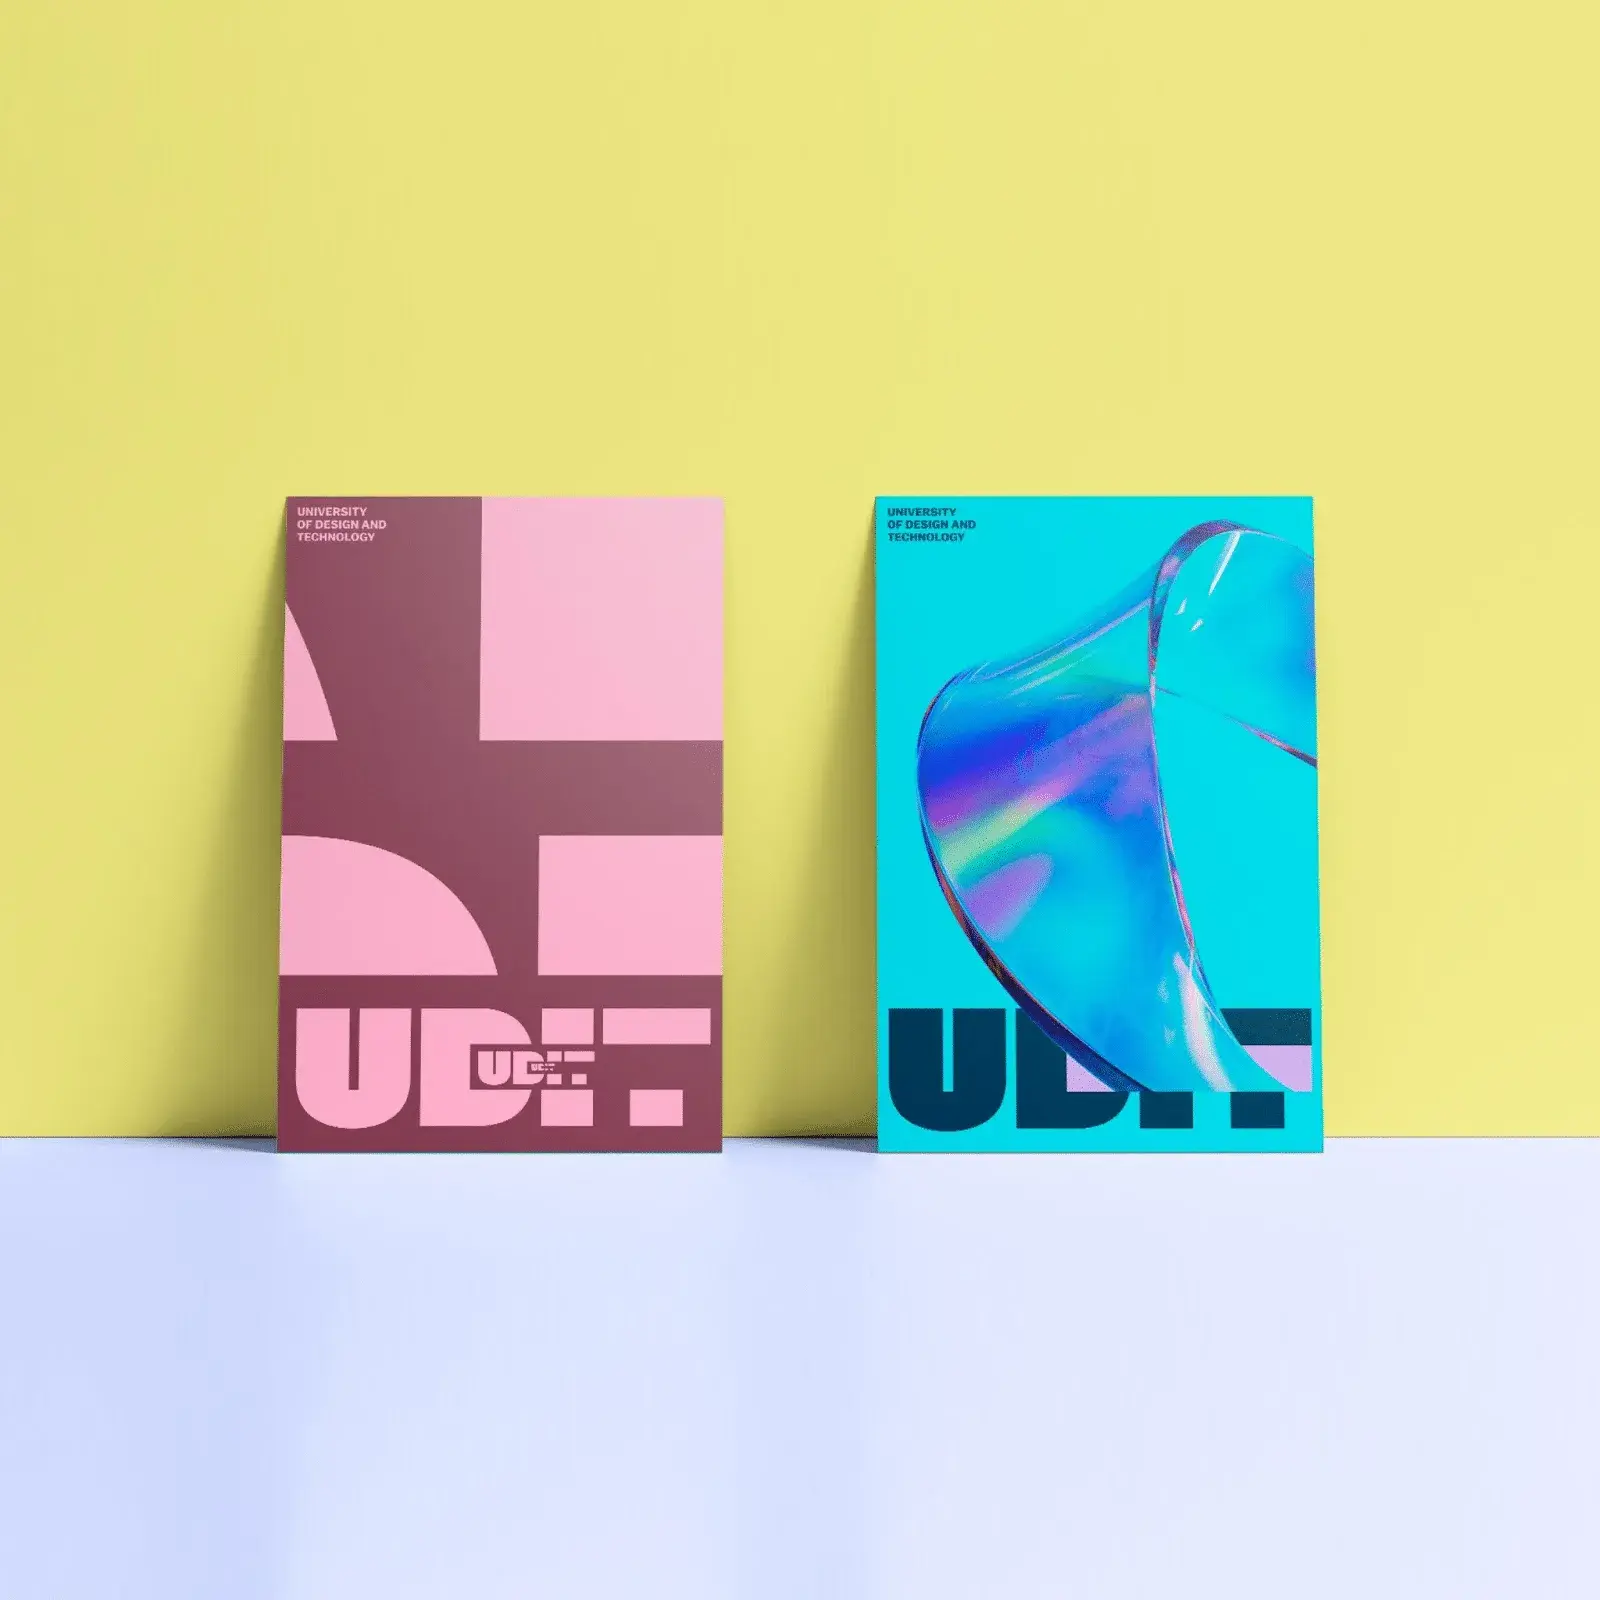 UDIT’s Bold and Playful Branding by Erretres